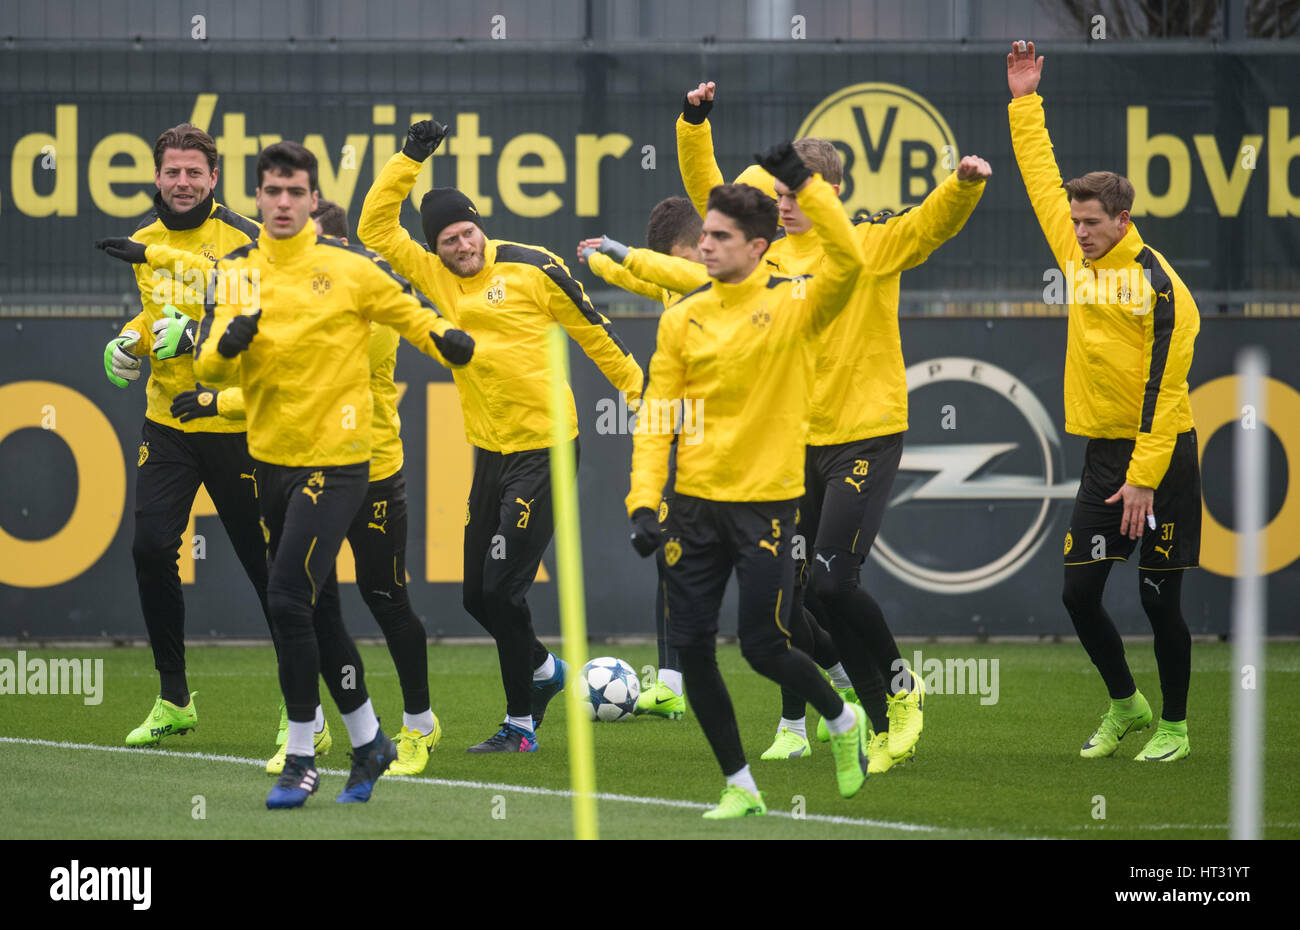 Dortmund, Germany. 7th Mar, 2017. Borussia Dortmund players warm up on the training grounds in Dortmund, Germany, 7 March 2017. BVB will meet Benfica Lissabon in the second round second legs of the Champions League (8.03.). Photo: Bernd Thissen/dpa/Alamy Live News Stock Photo